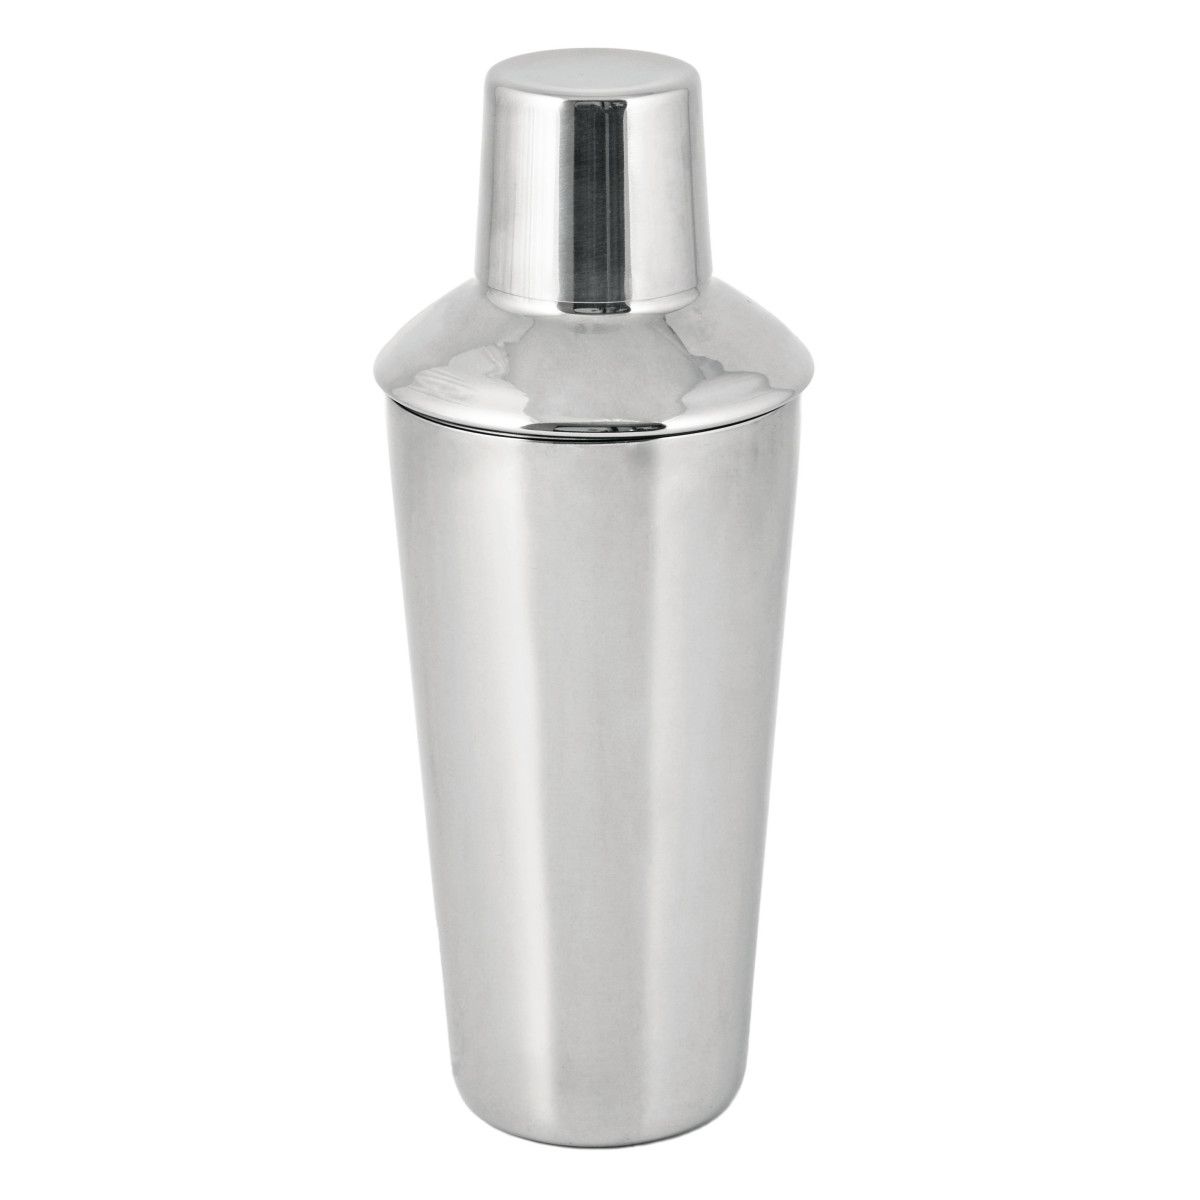 Stainless-Steel Cocktail Shaker